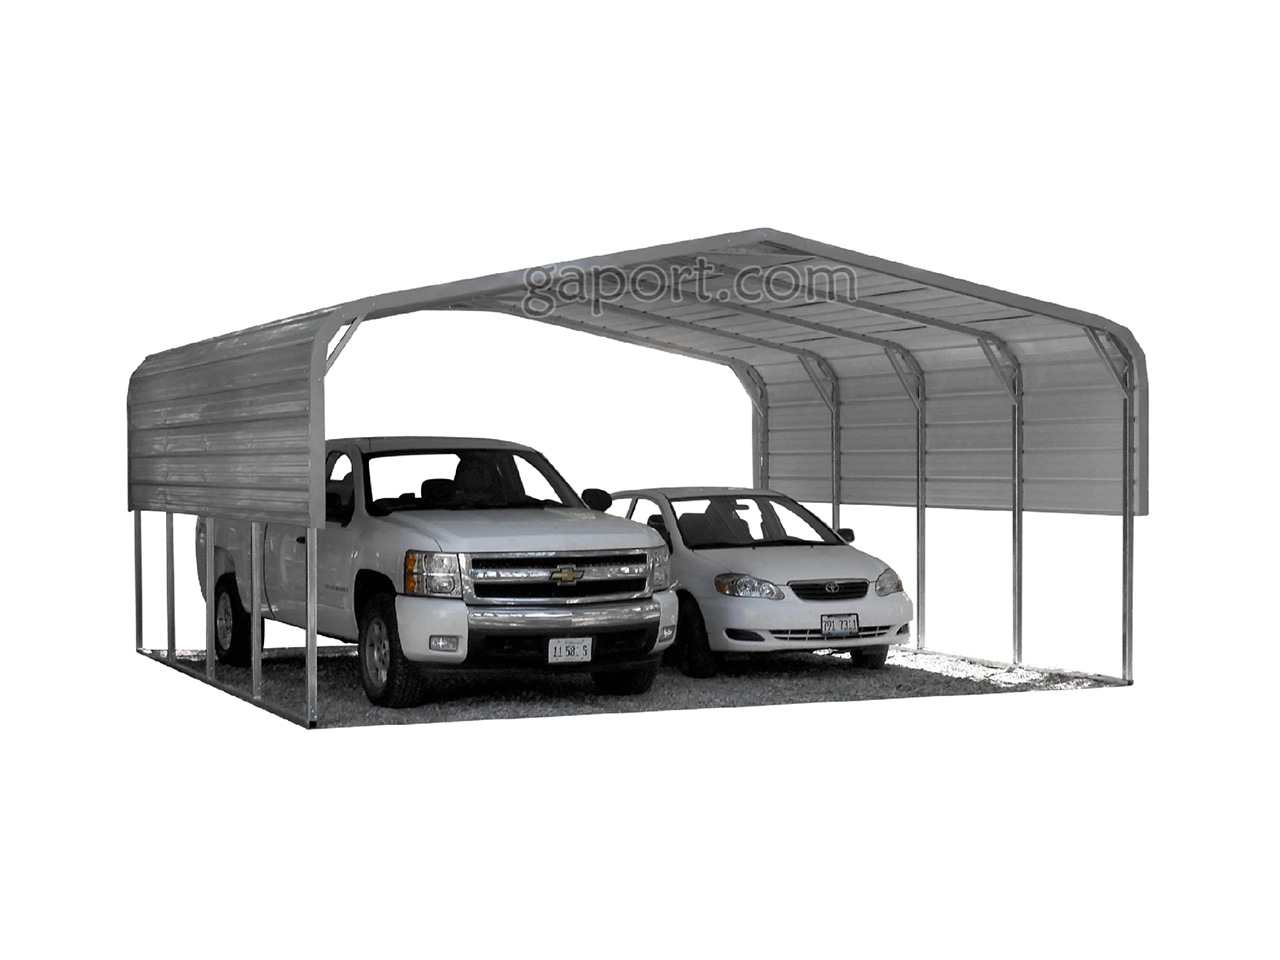 displaying a carport for sale with a panel on each side covering a truck and car